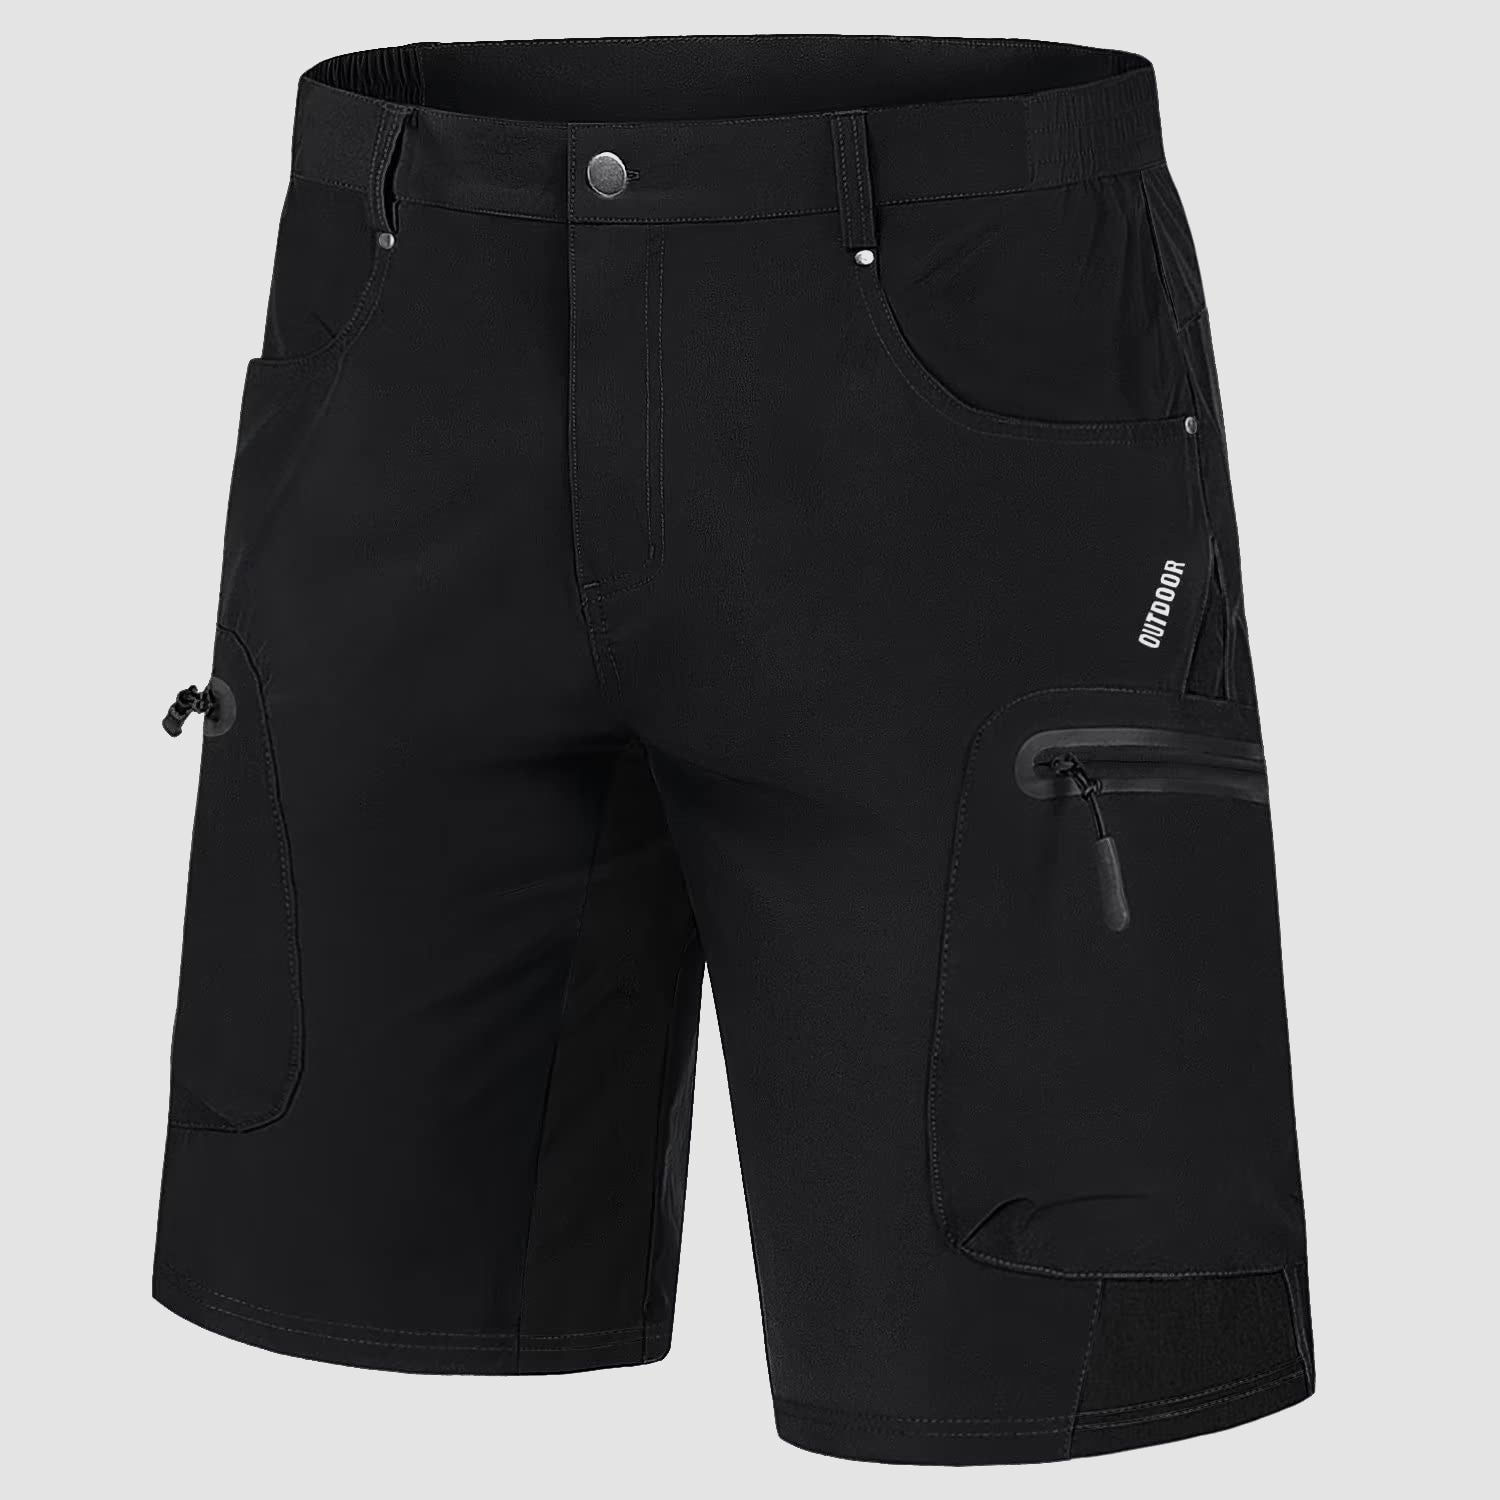 【Buy 4 Get the 4th Free！】Men's Cargo Shorts  Quick Dry Lightweight & Water Repellent